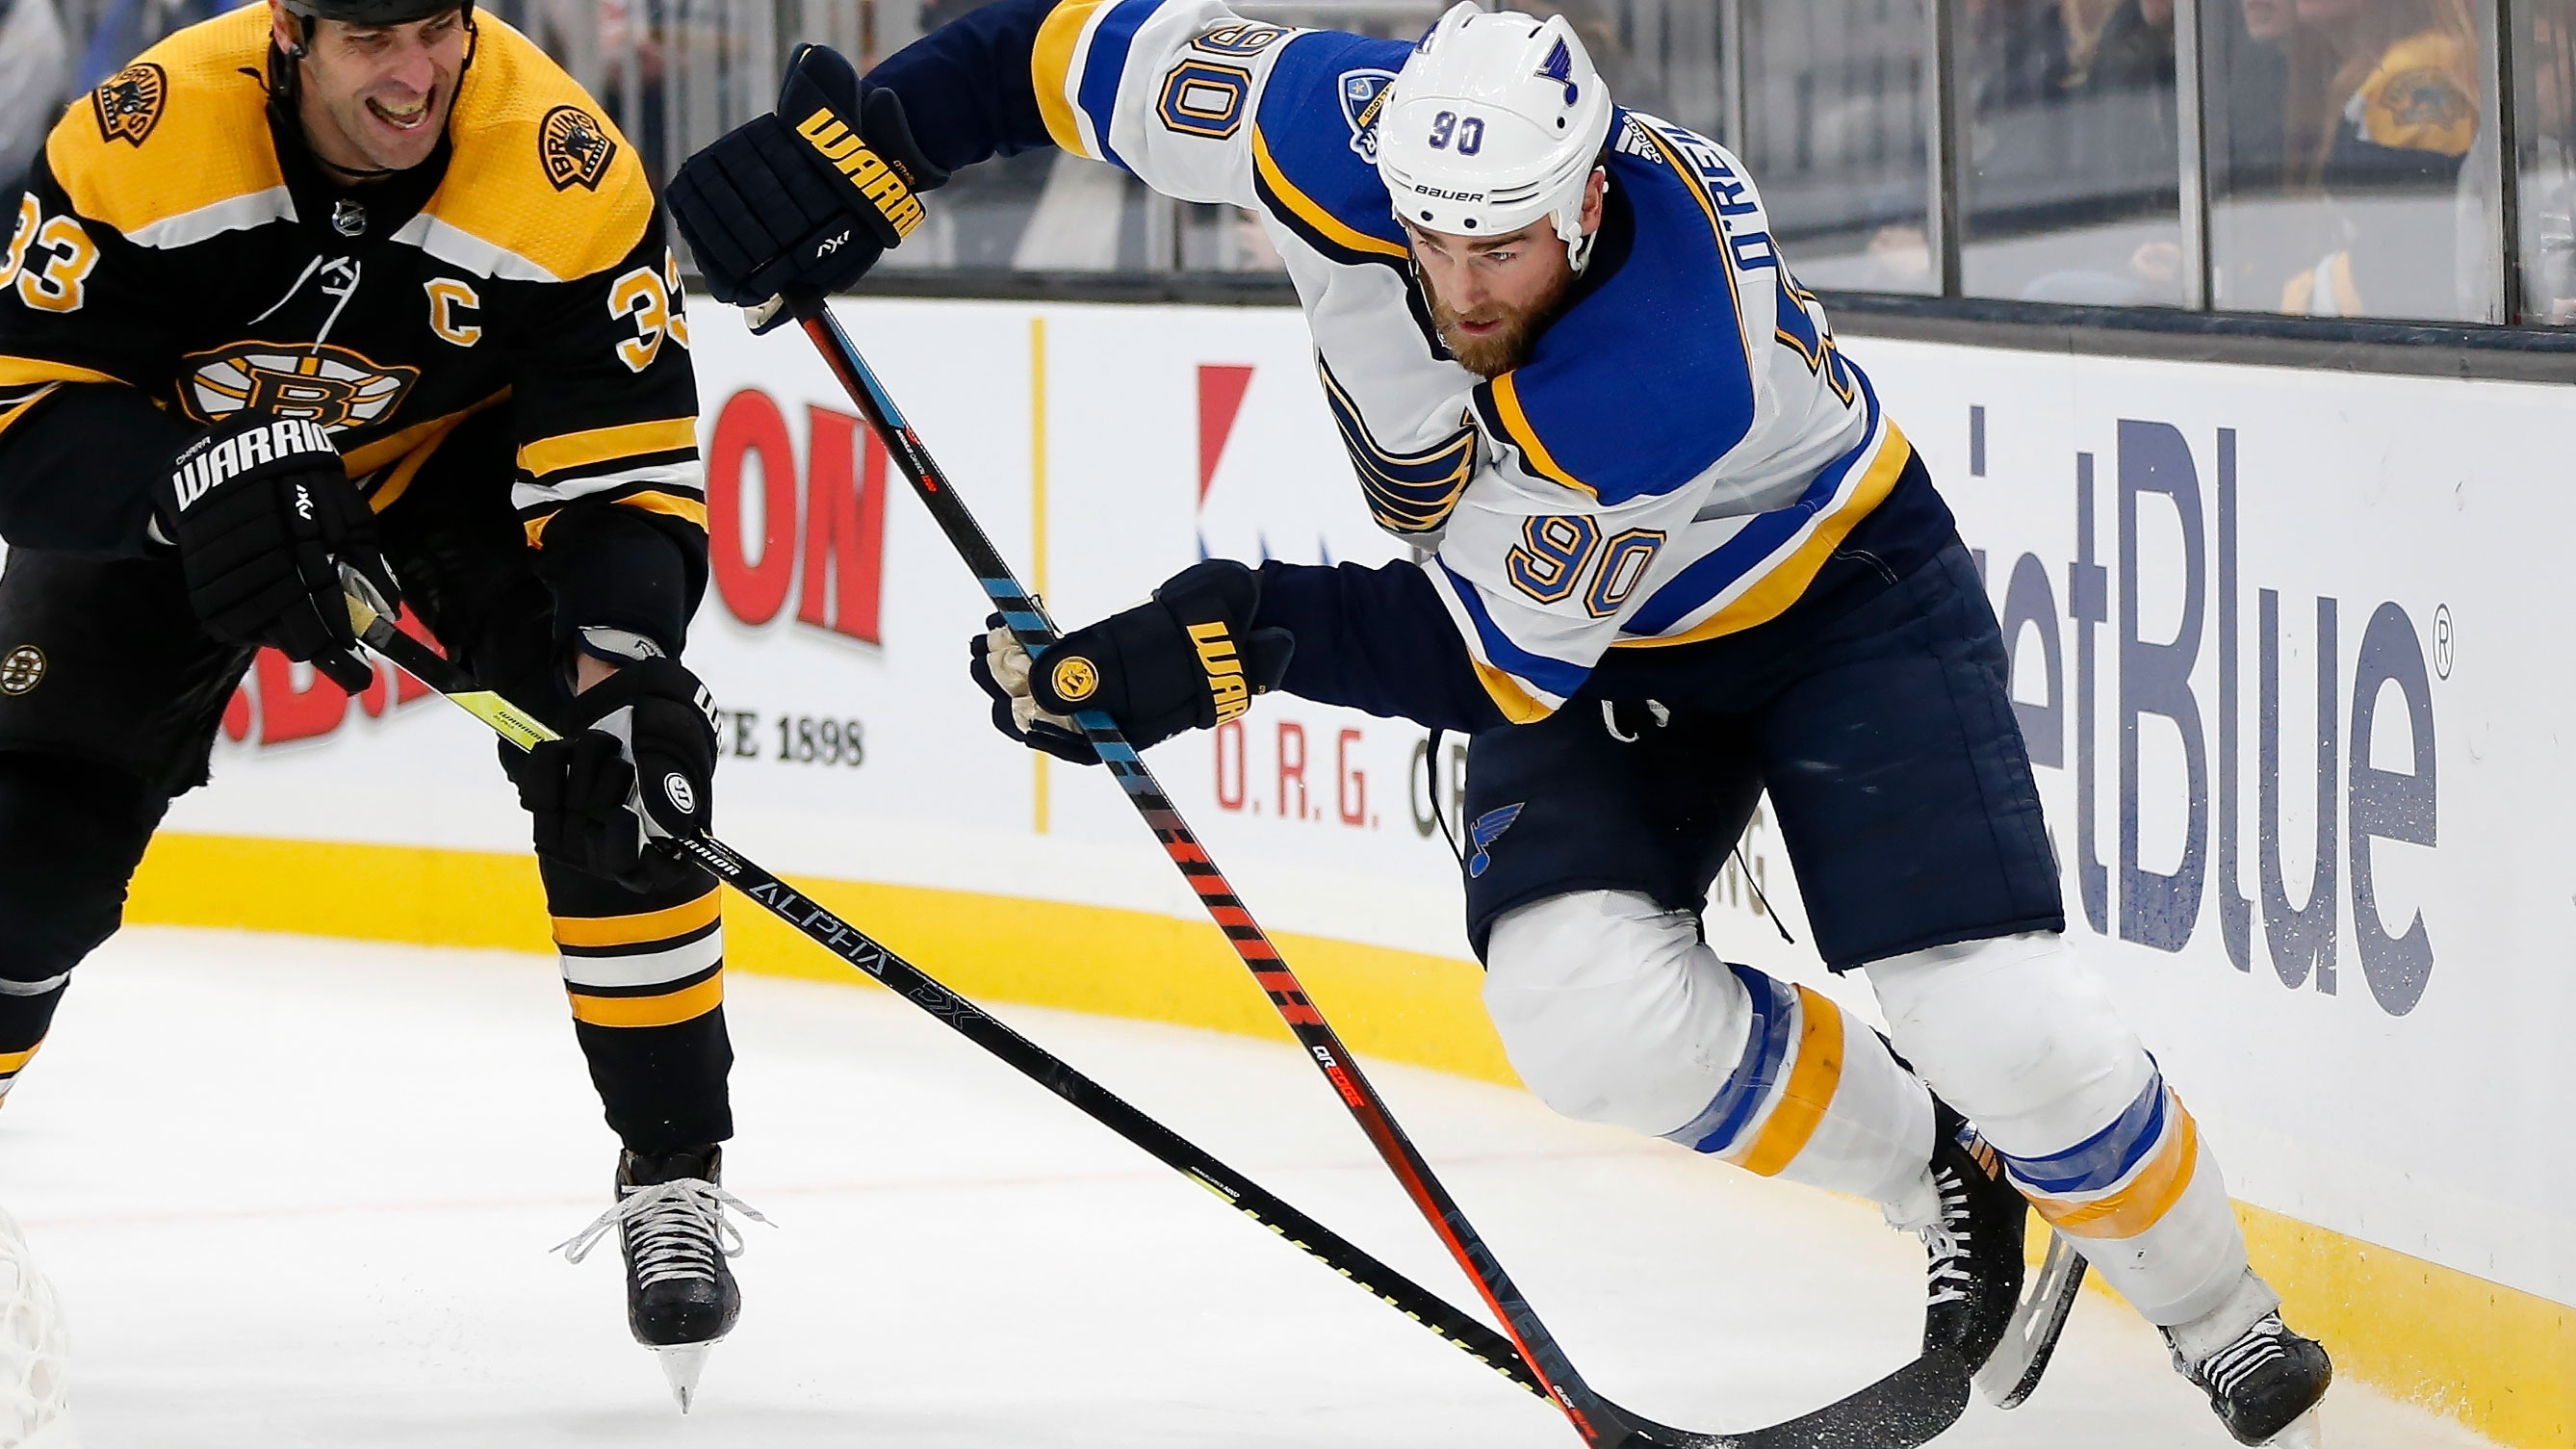 Blues shut out by Bruins 3-0 in first matchup since Stanley Cup Final